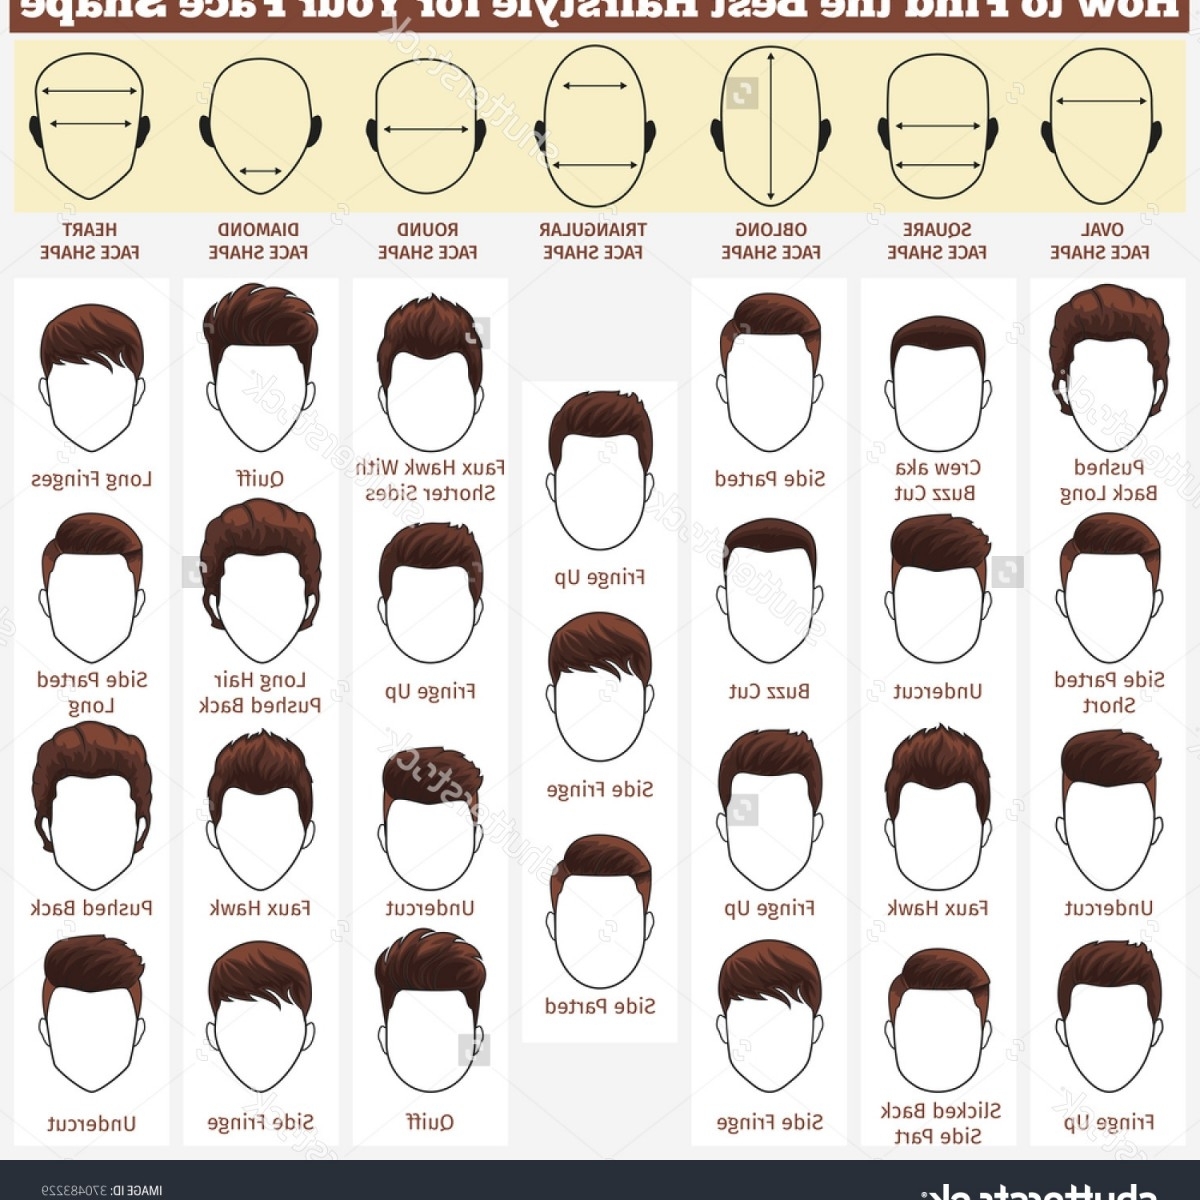 42+ Name of the hairstyle info